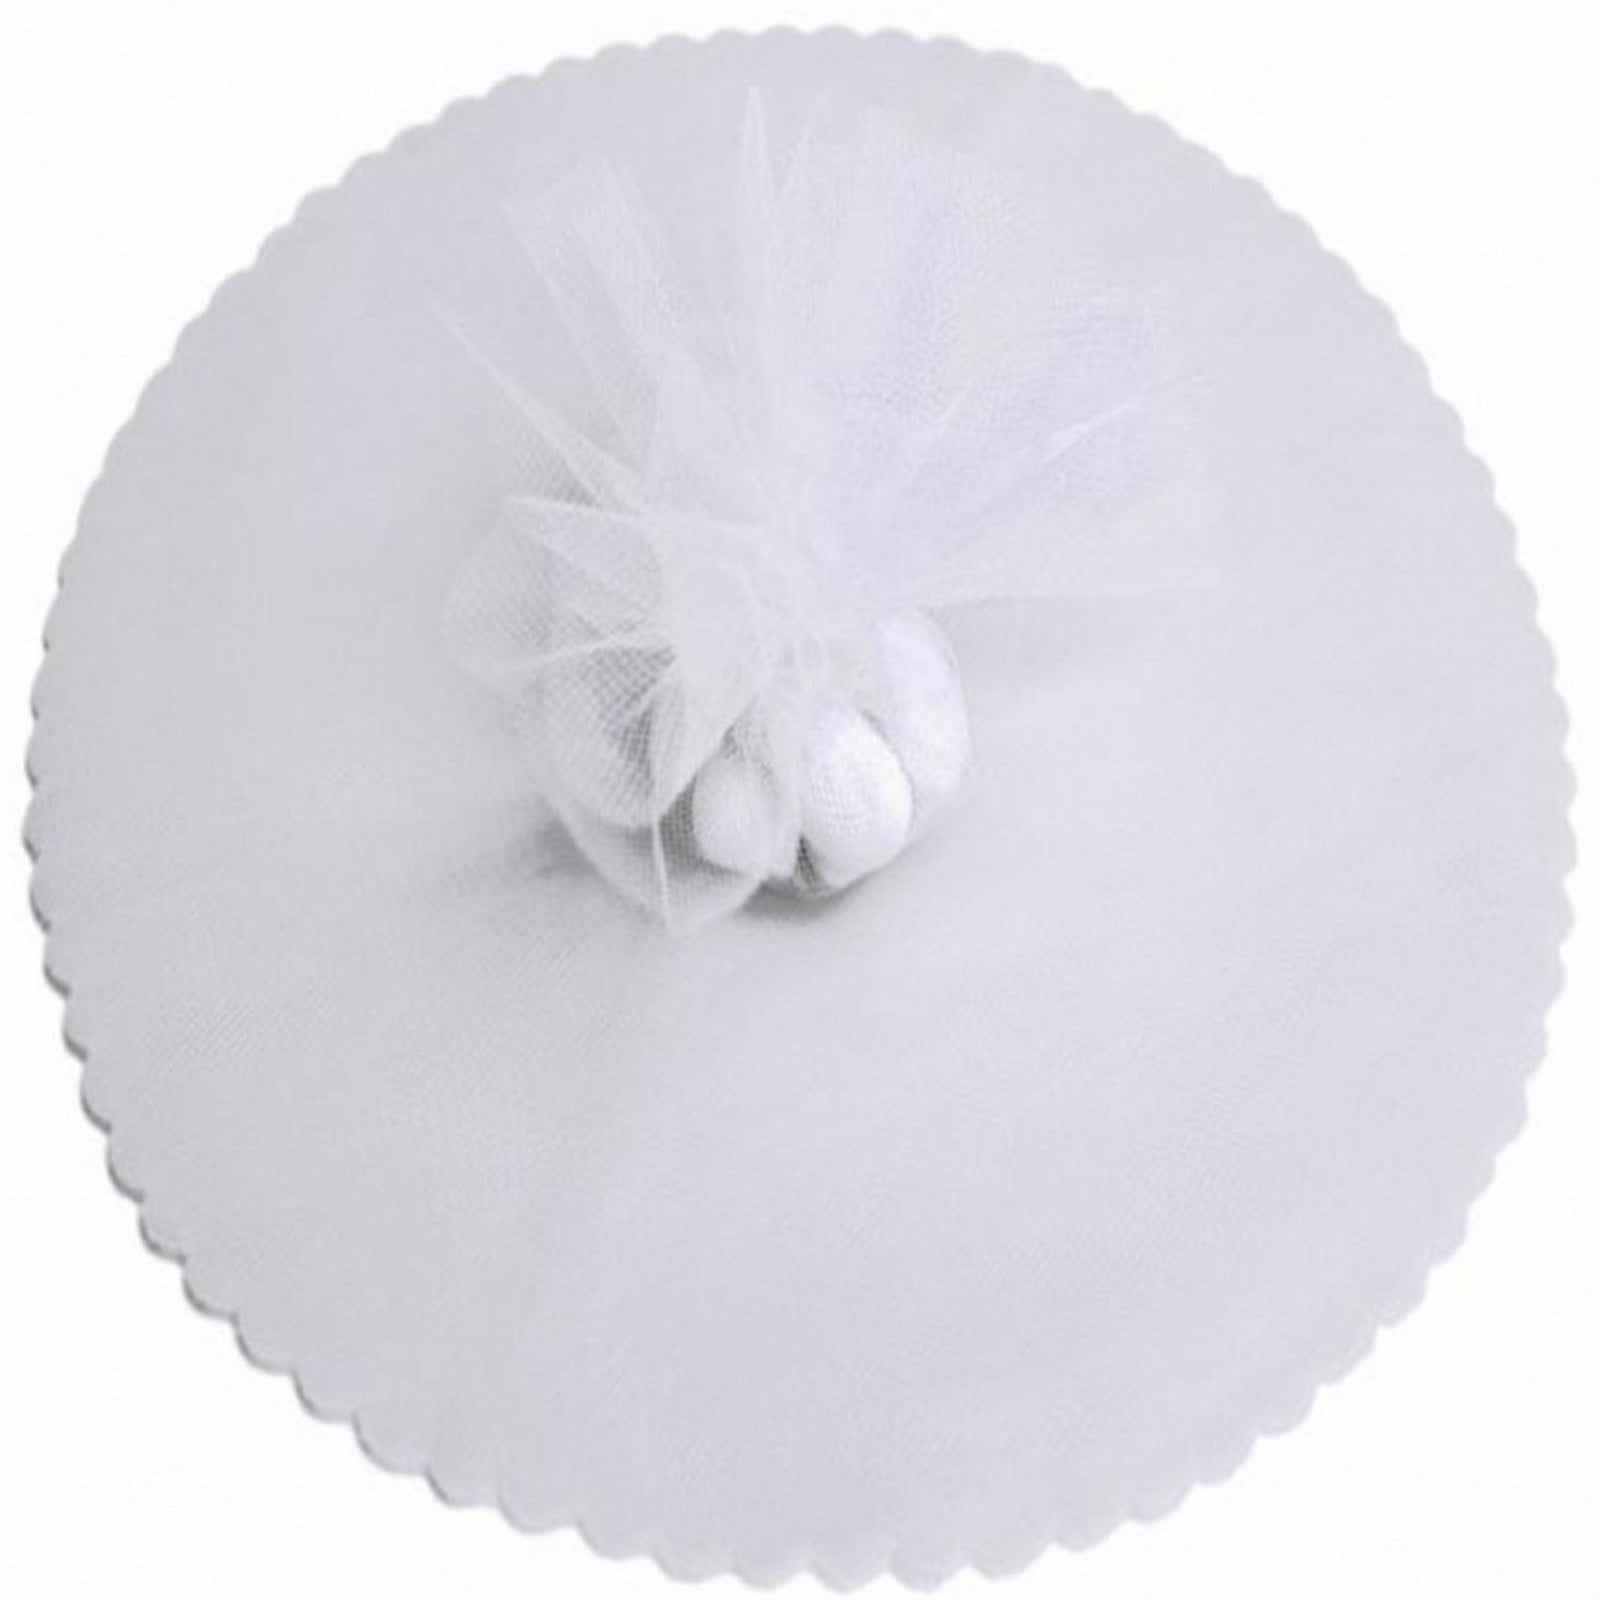 50 Scalloped tinted Edge Circular Favour/Bomboniere Tulle Nets Choice-4 colours 